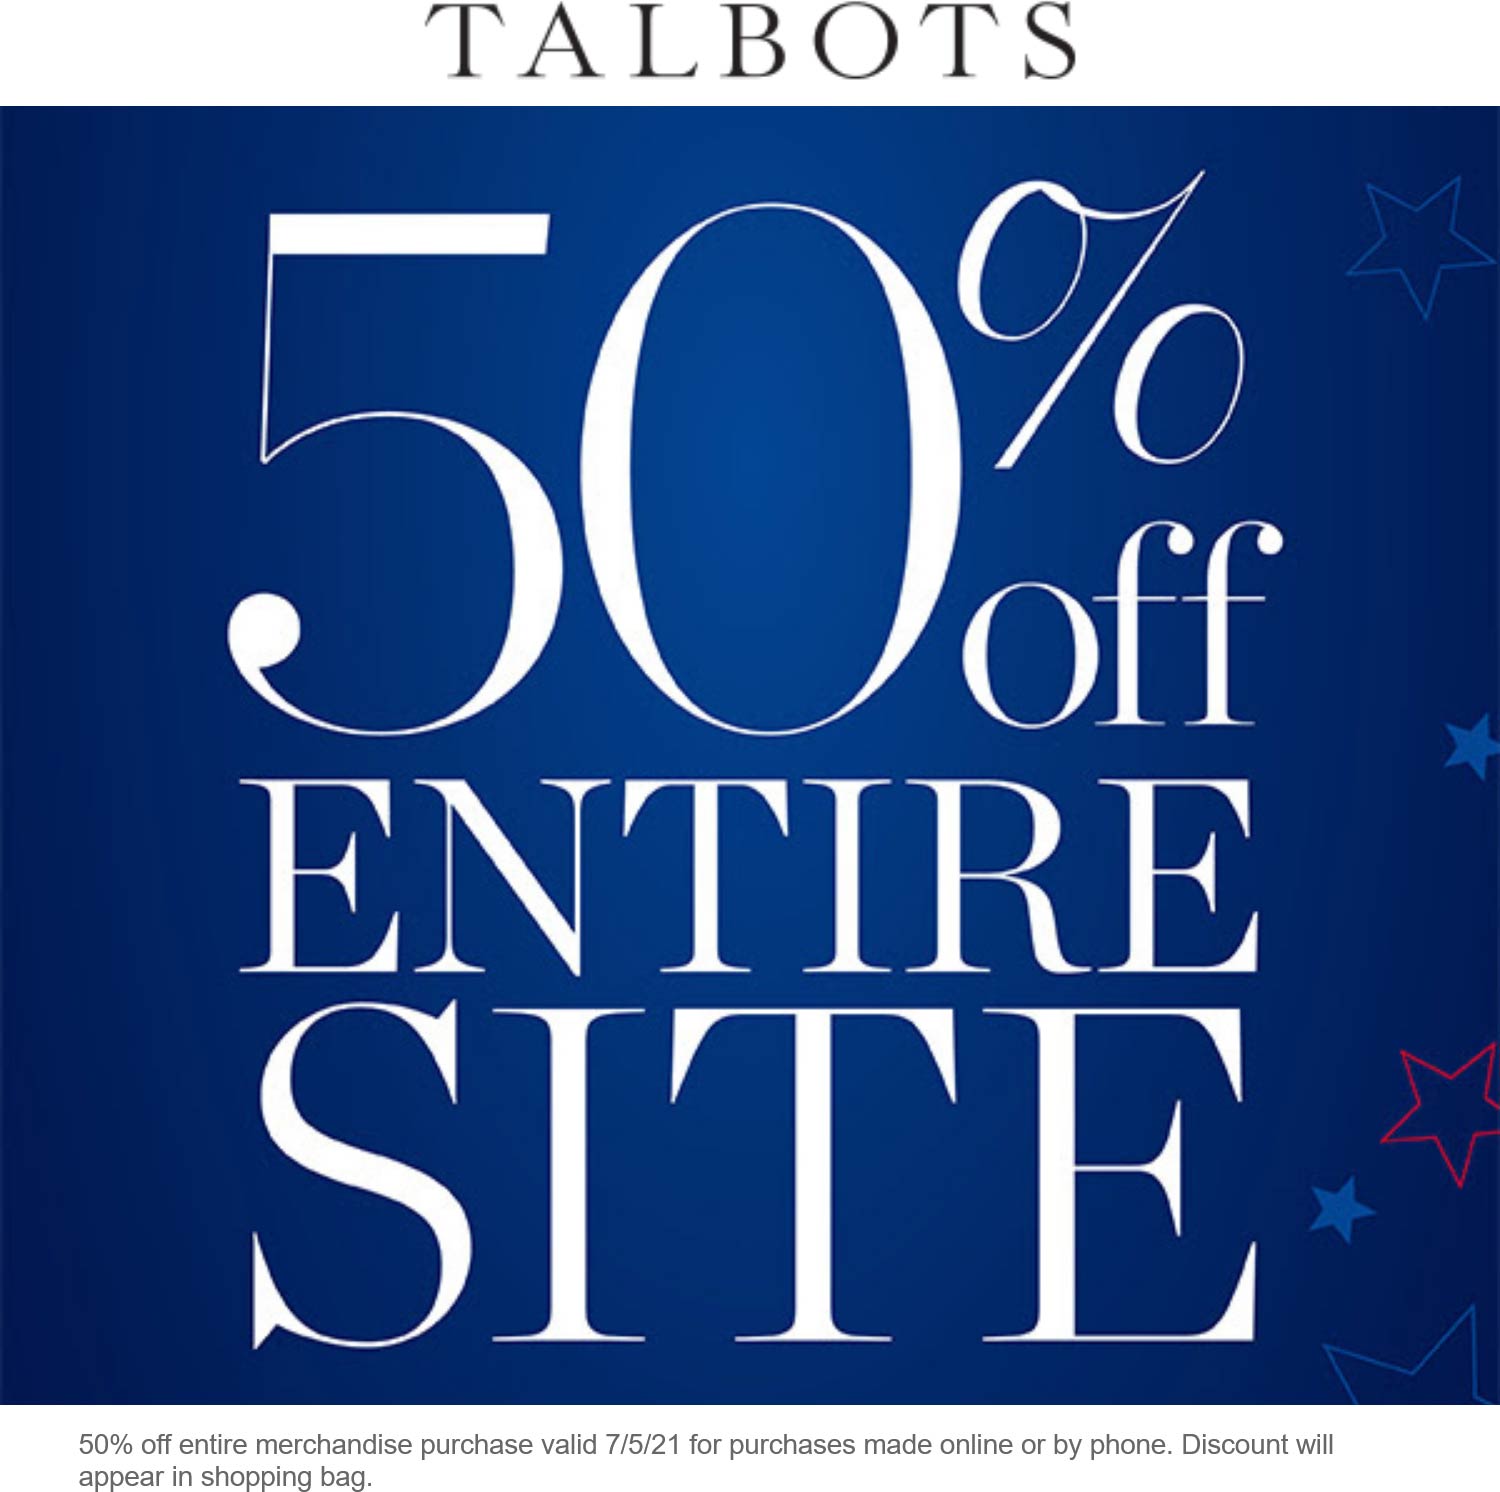 Talbots stores Coupon  50% off everything today online at Talbots #talbots 